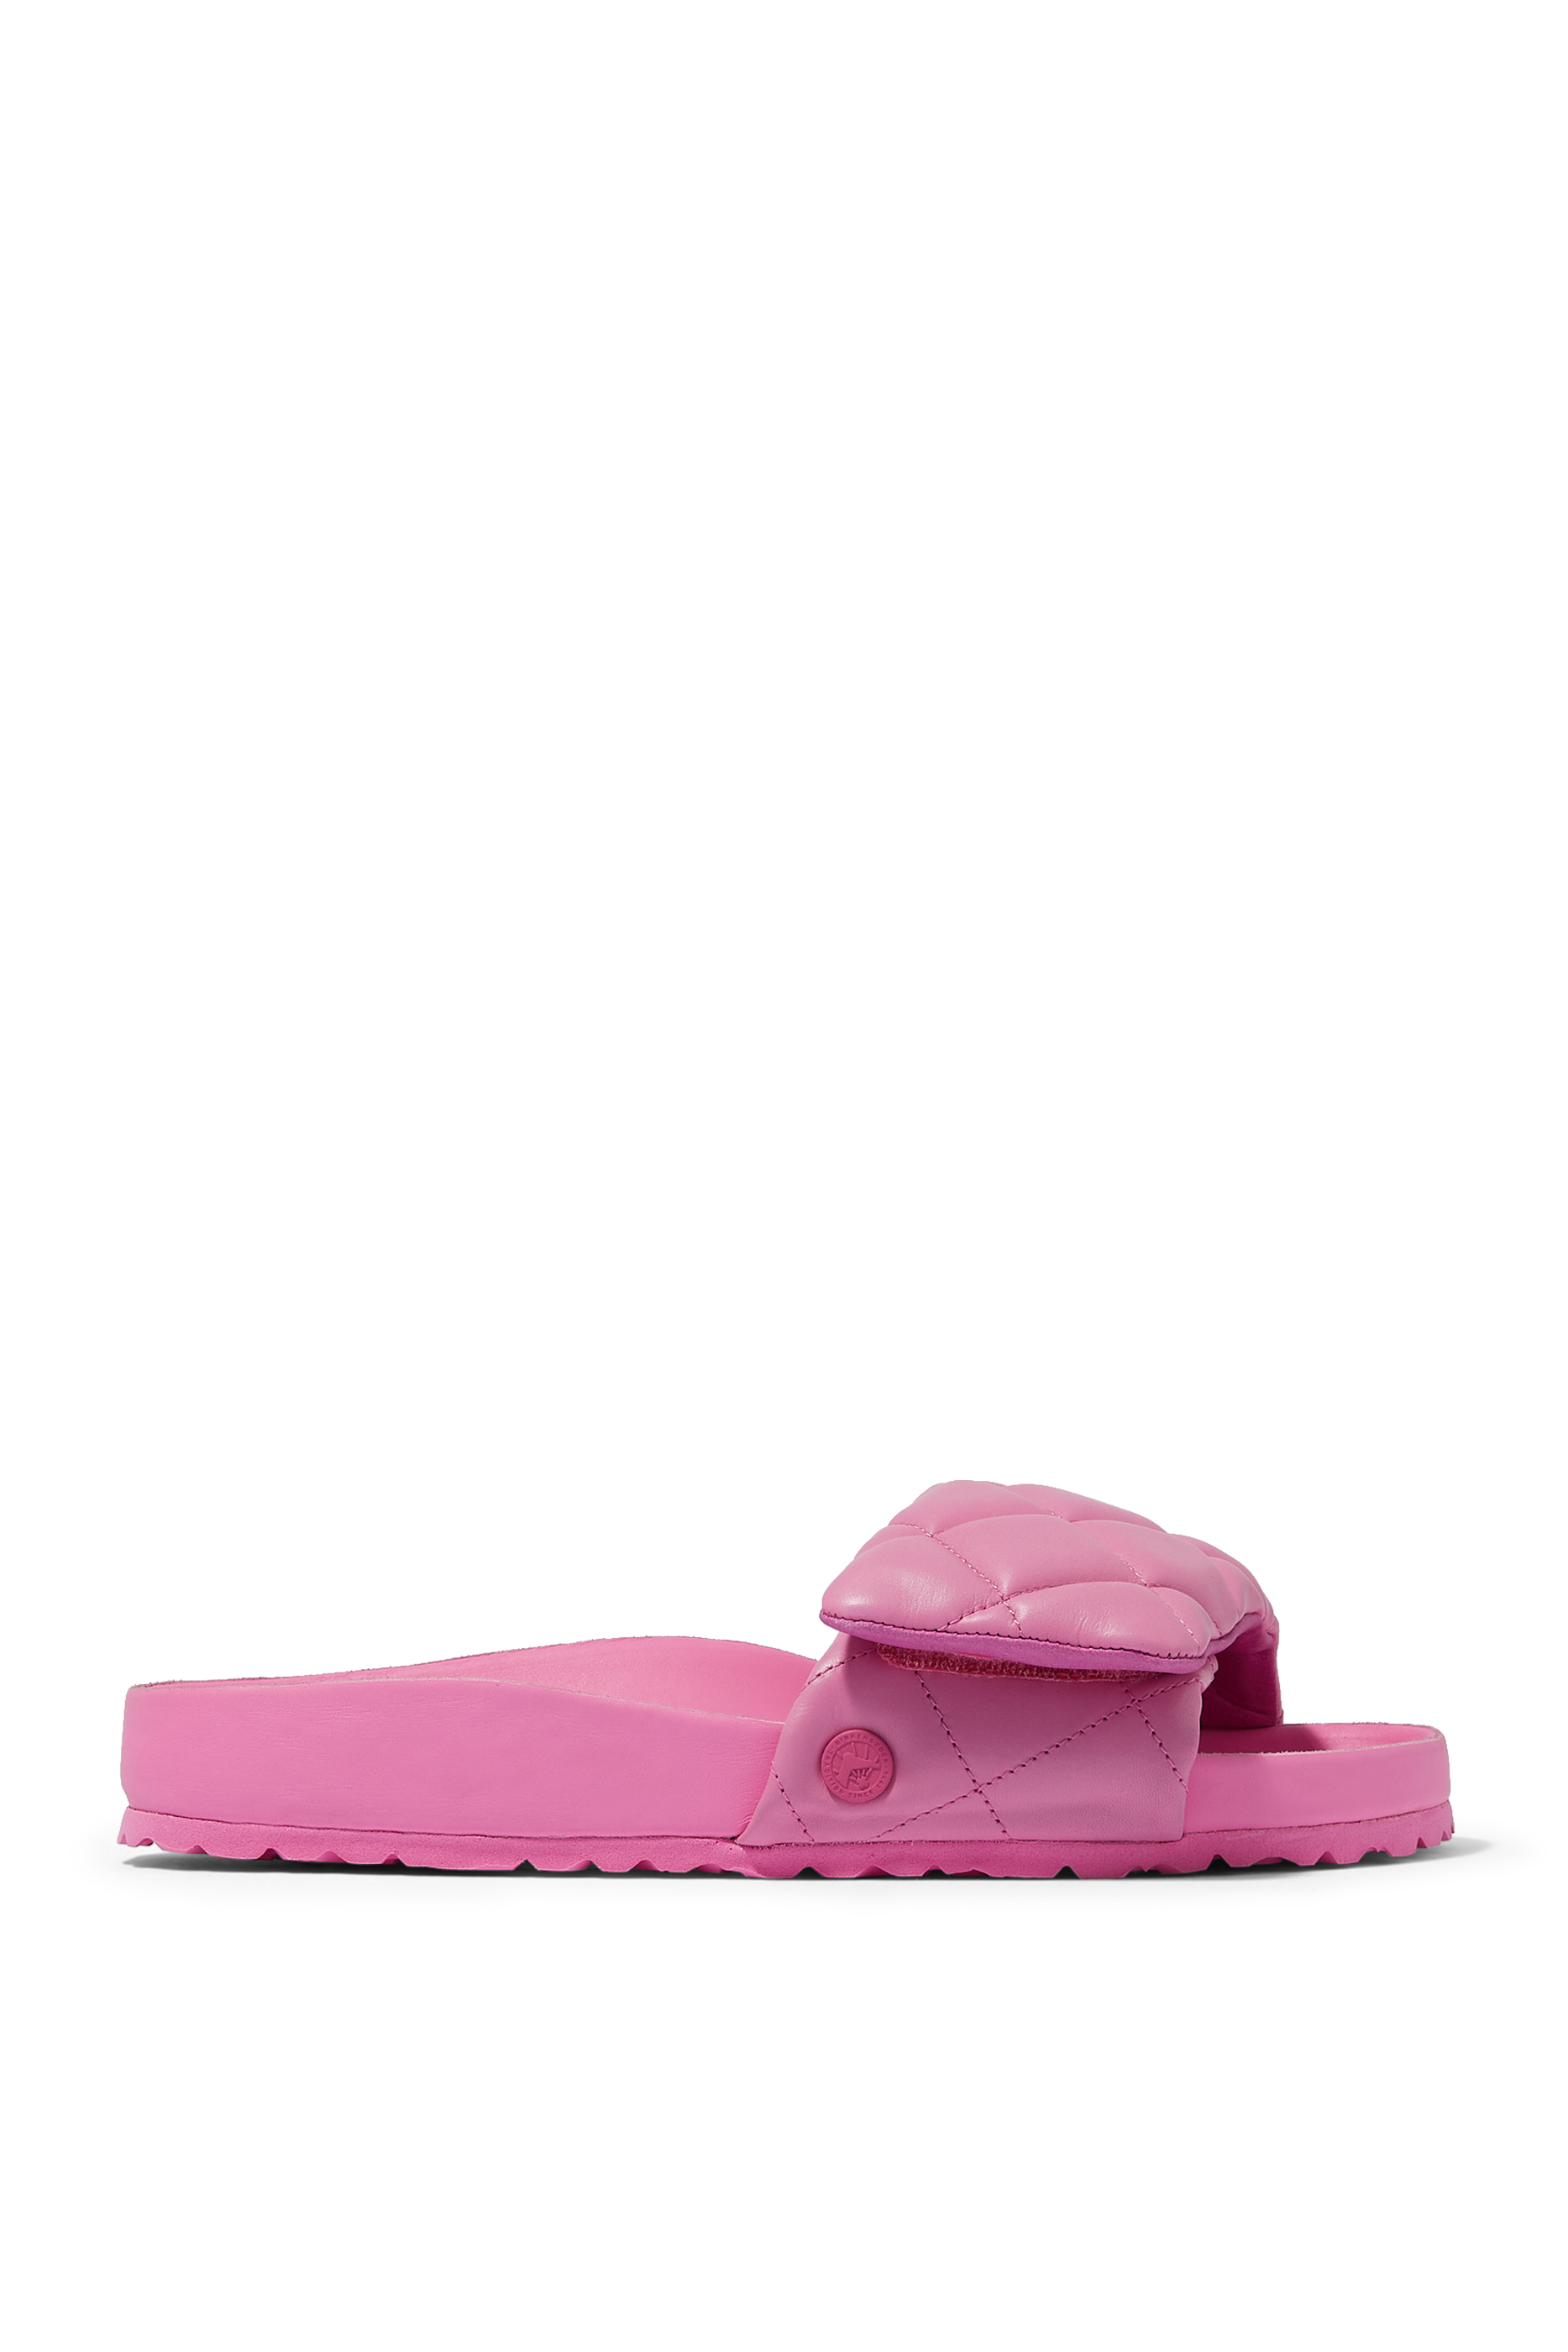 Buy BIRKENSTOCK 1774 Sylt Quilted Leather Slides for Womens ...